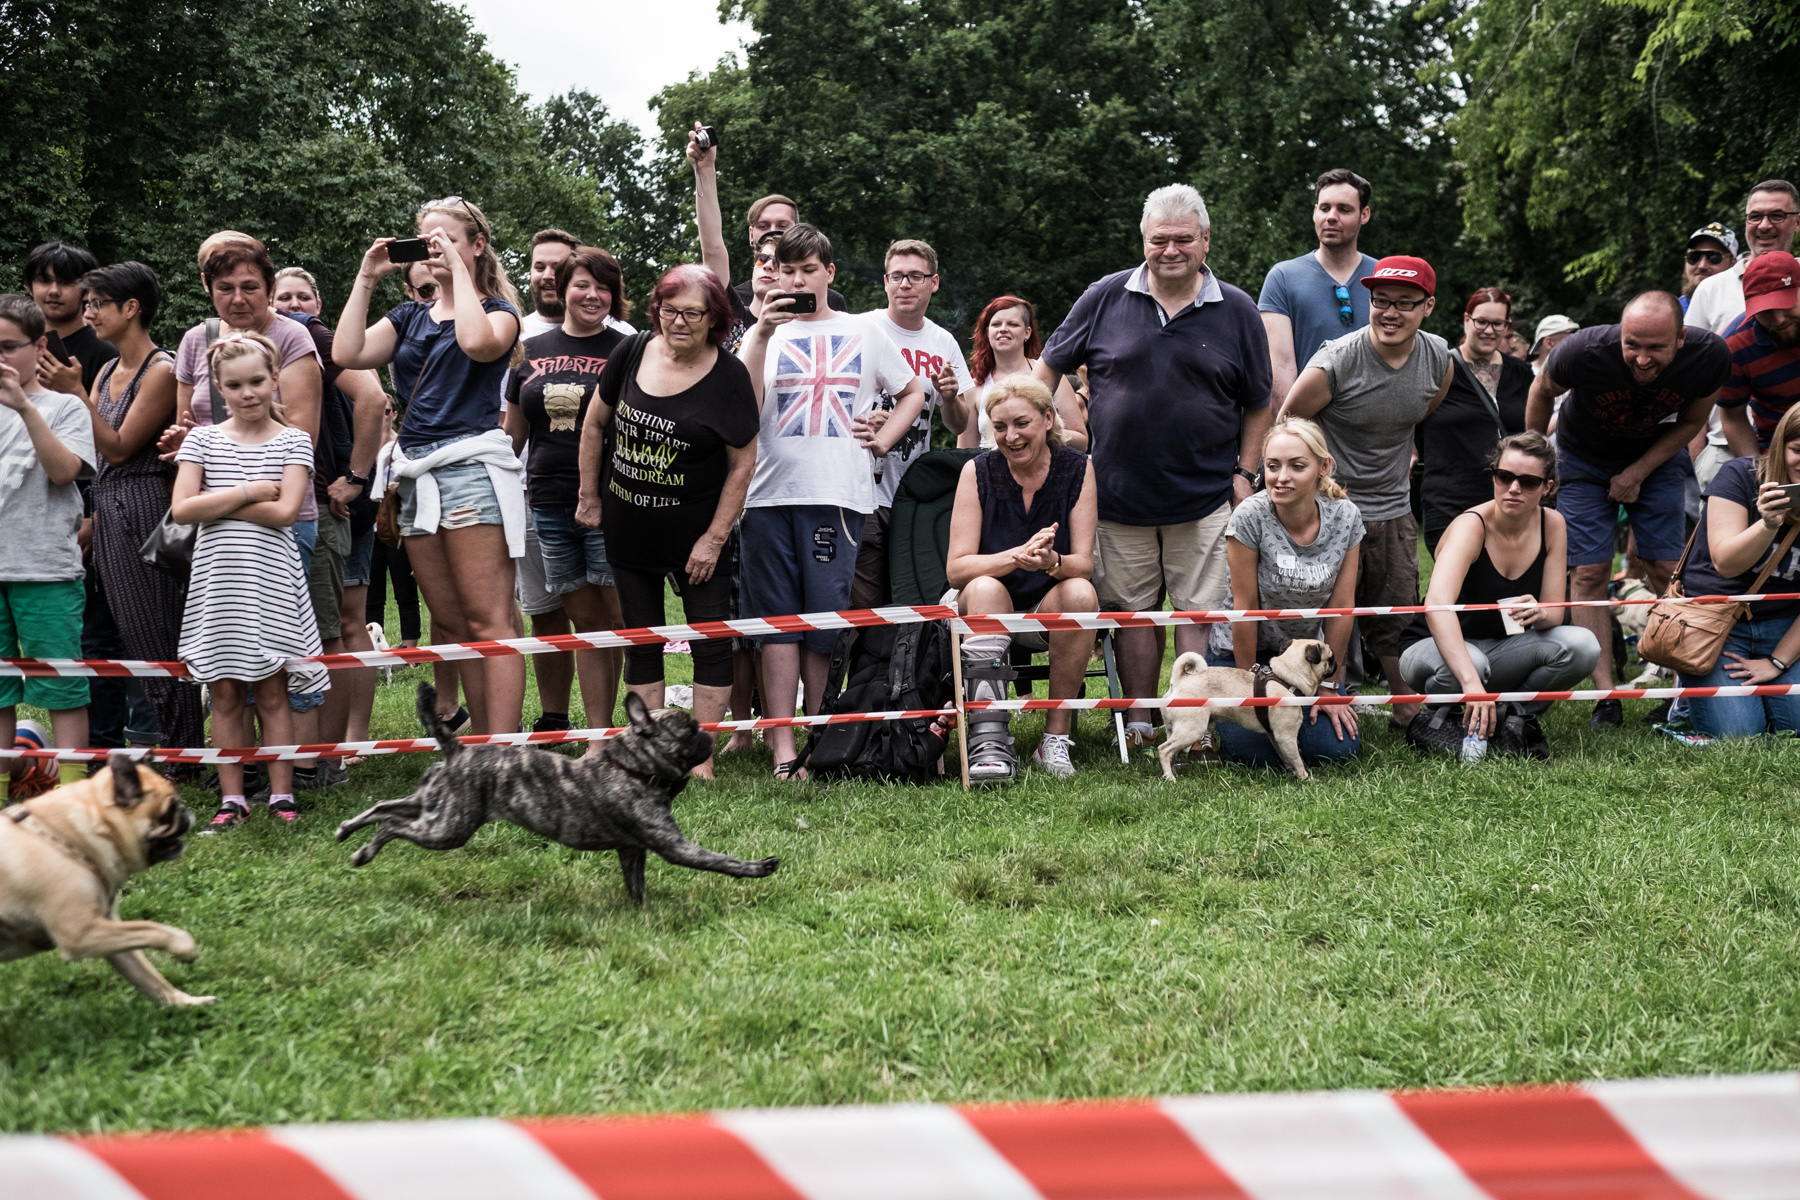 People are watching a pug race in the Büsing park Offenbach and some are cheering for their dogs to make them run faster, Two dogs are seen on the left side of the picture